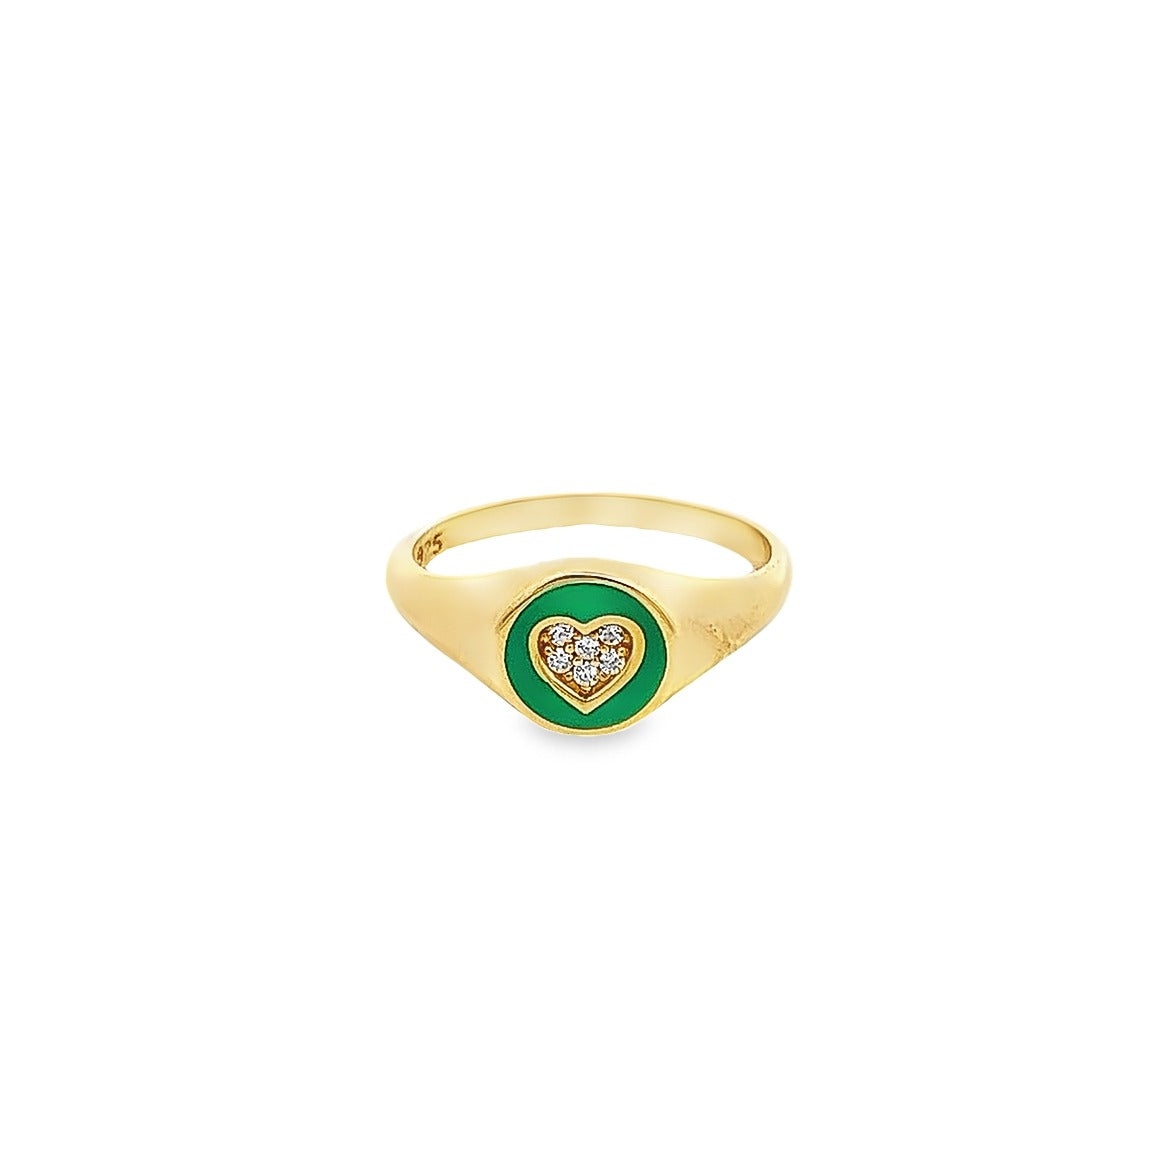 925 GOLD PLATED HEART RING WITH GREEN ENAMEL AND CRYSTALS